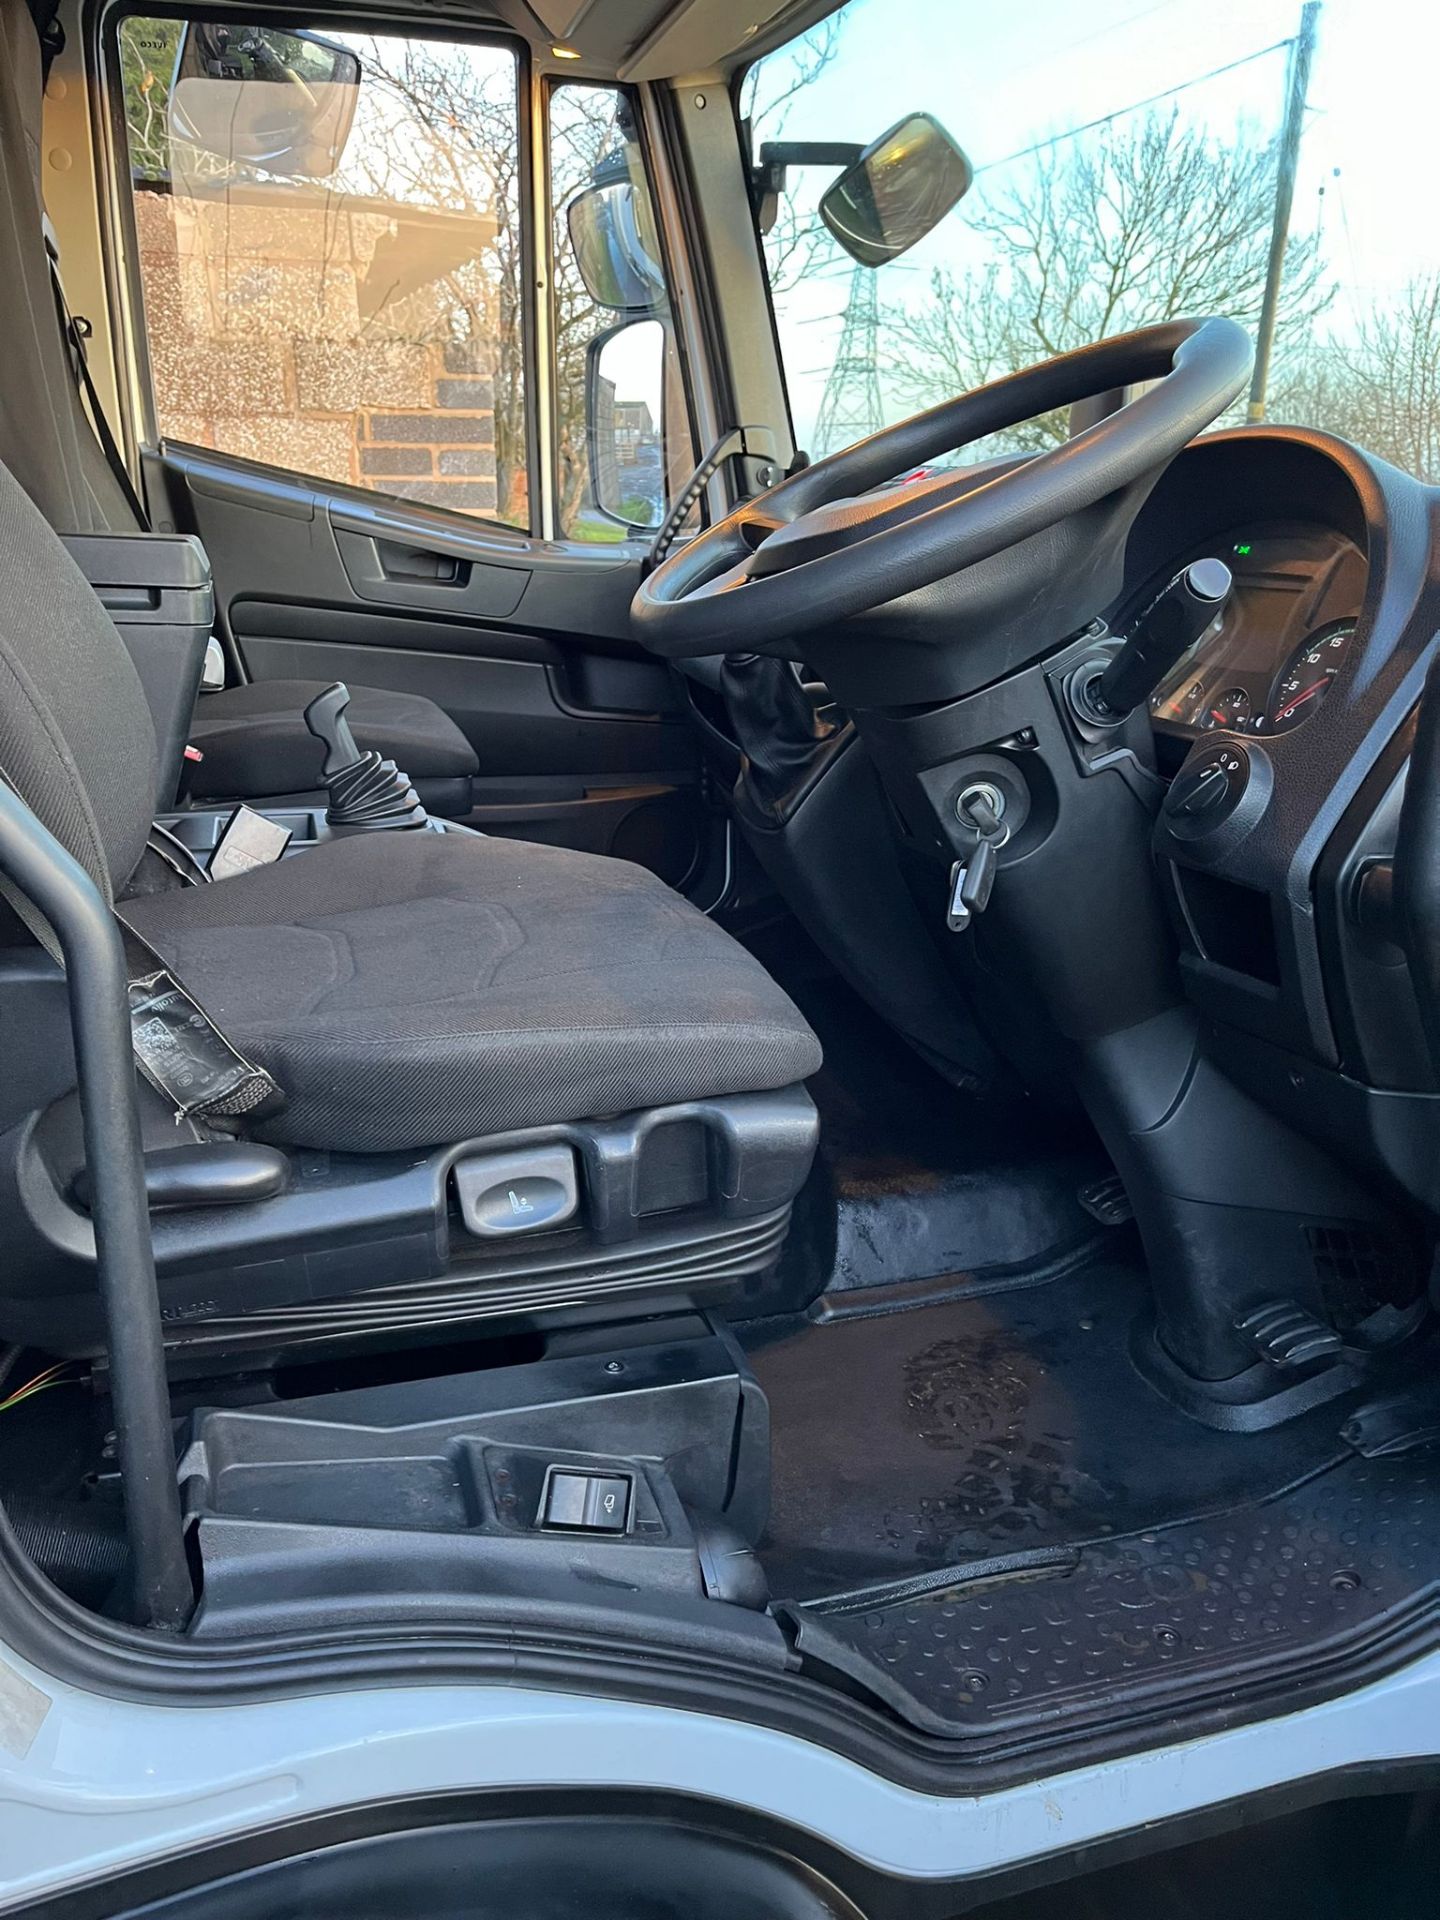 SPACIOUS SLEEPER CAB: 2019 IVECO EUROCARGO FOR HAULING - Image 10 of 21